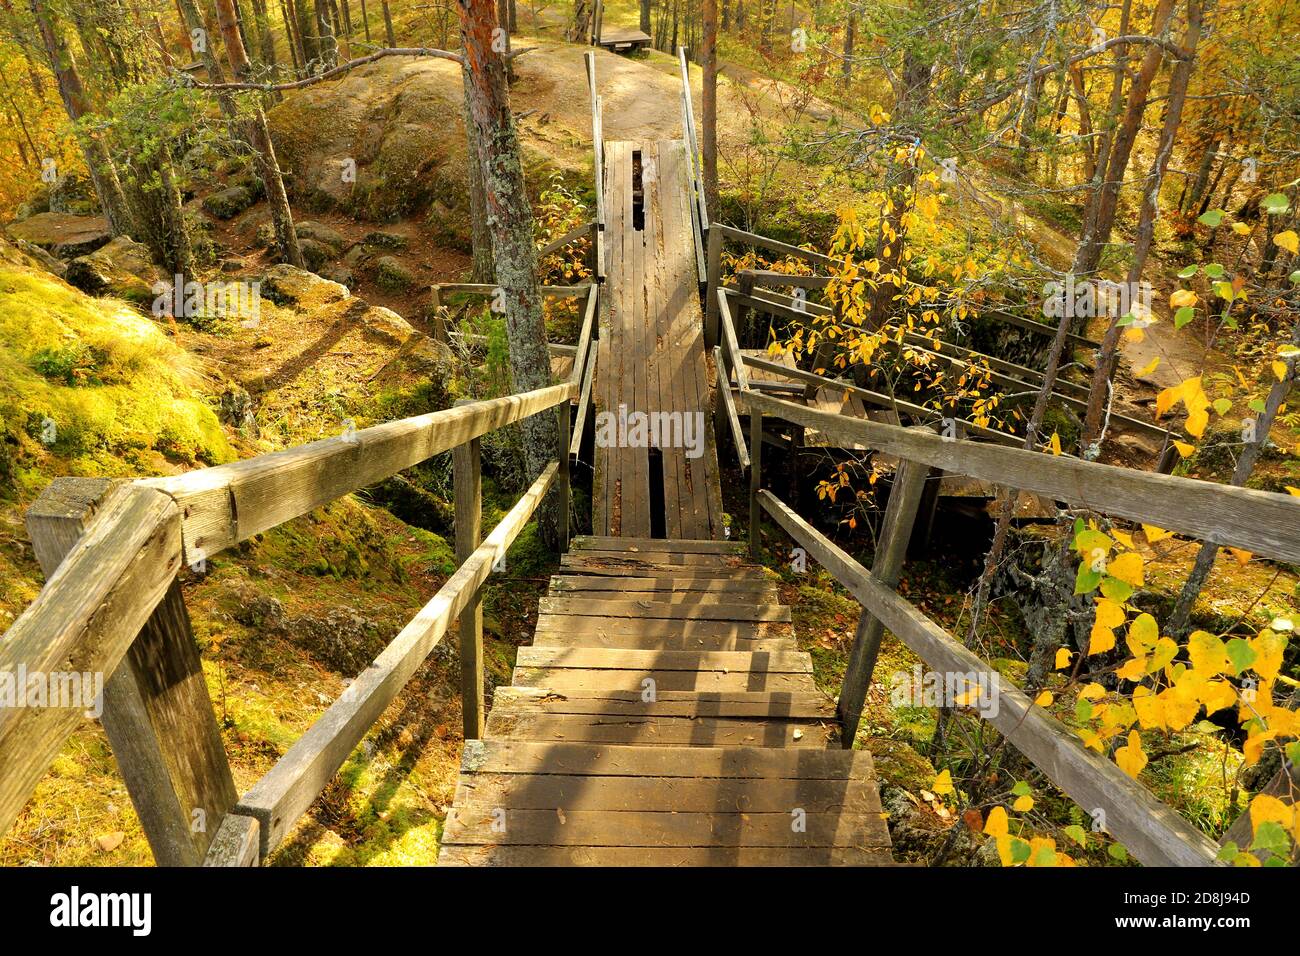 An old, dangerous, wooden bridge in the autumn forest. Yellow trees and bushes around. Perspective view. Stock Photo